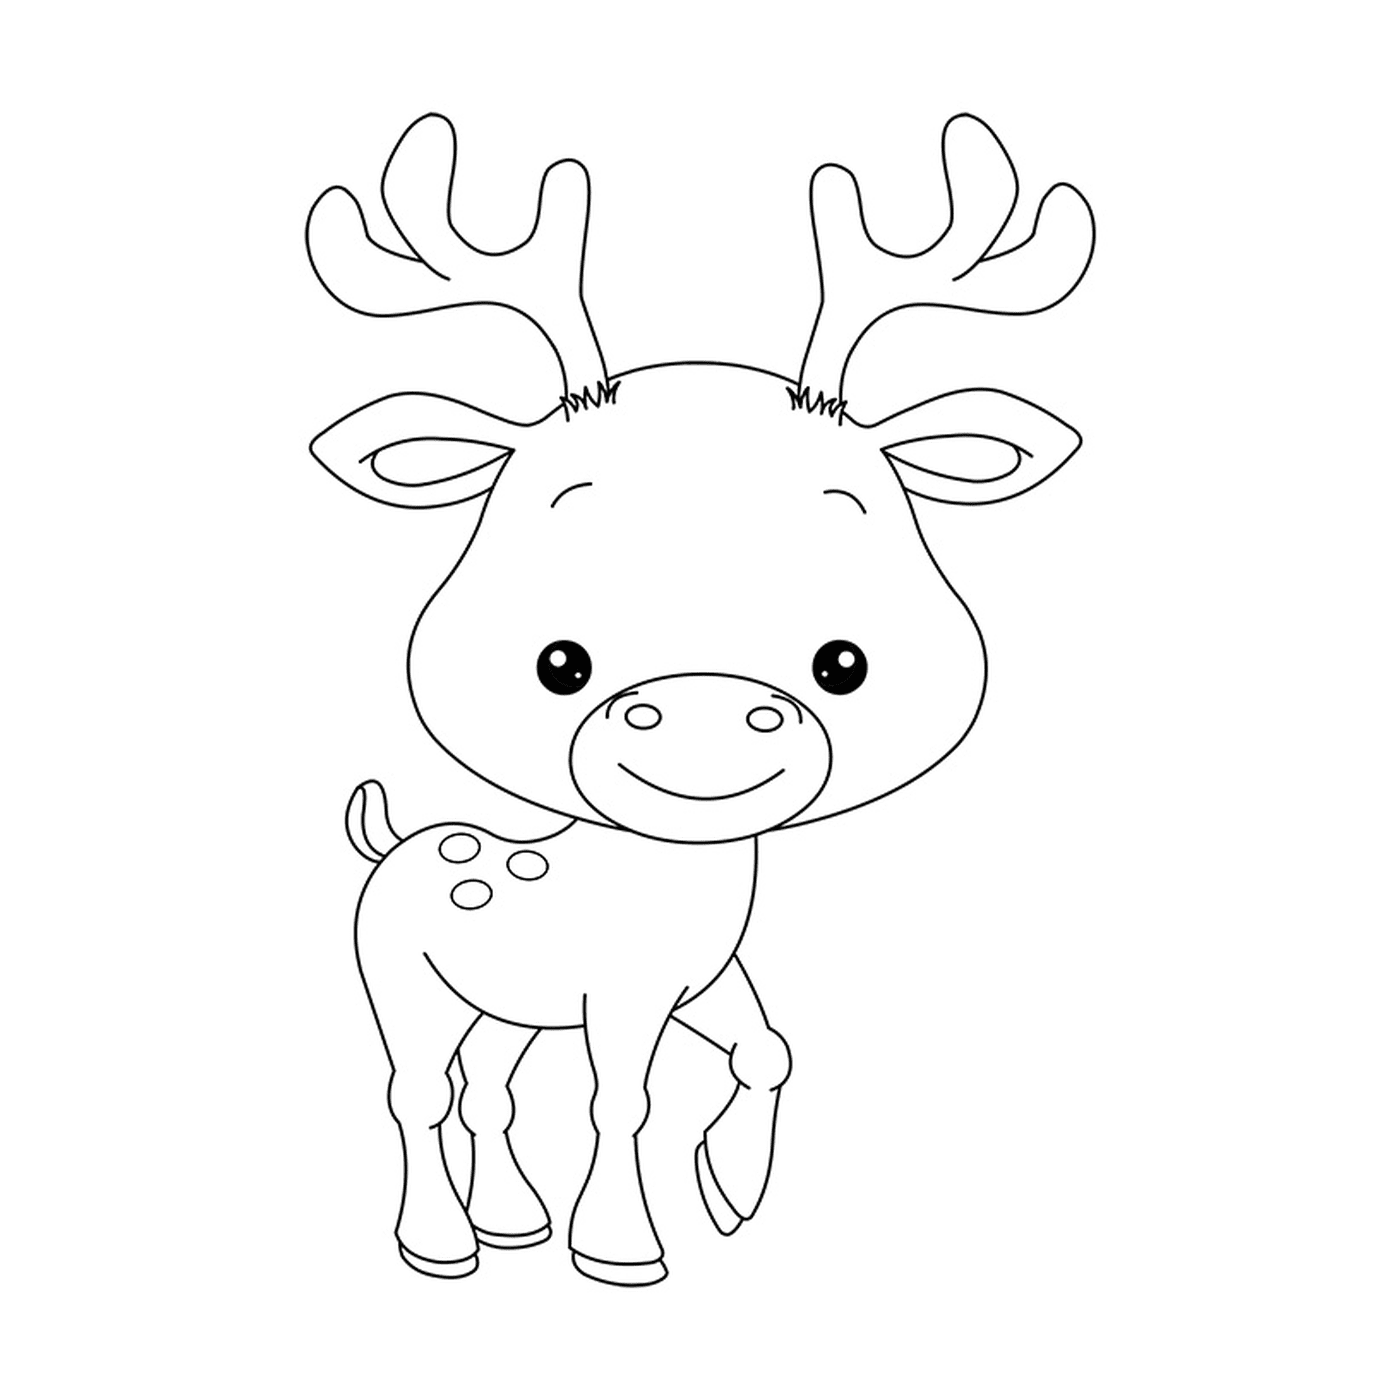  Laughing from a young reindeer 